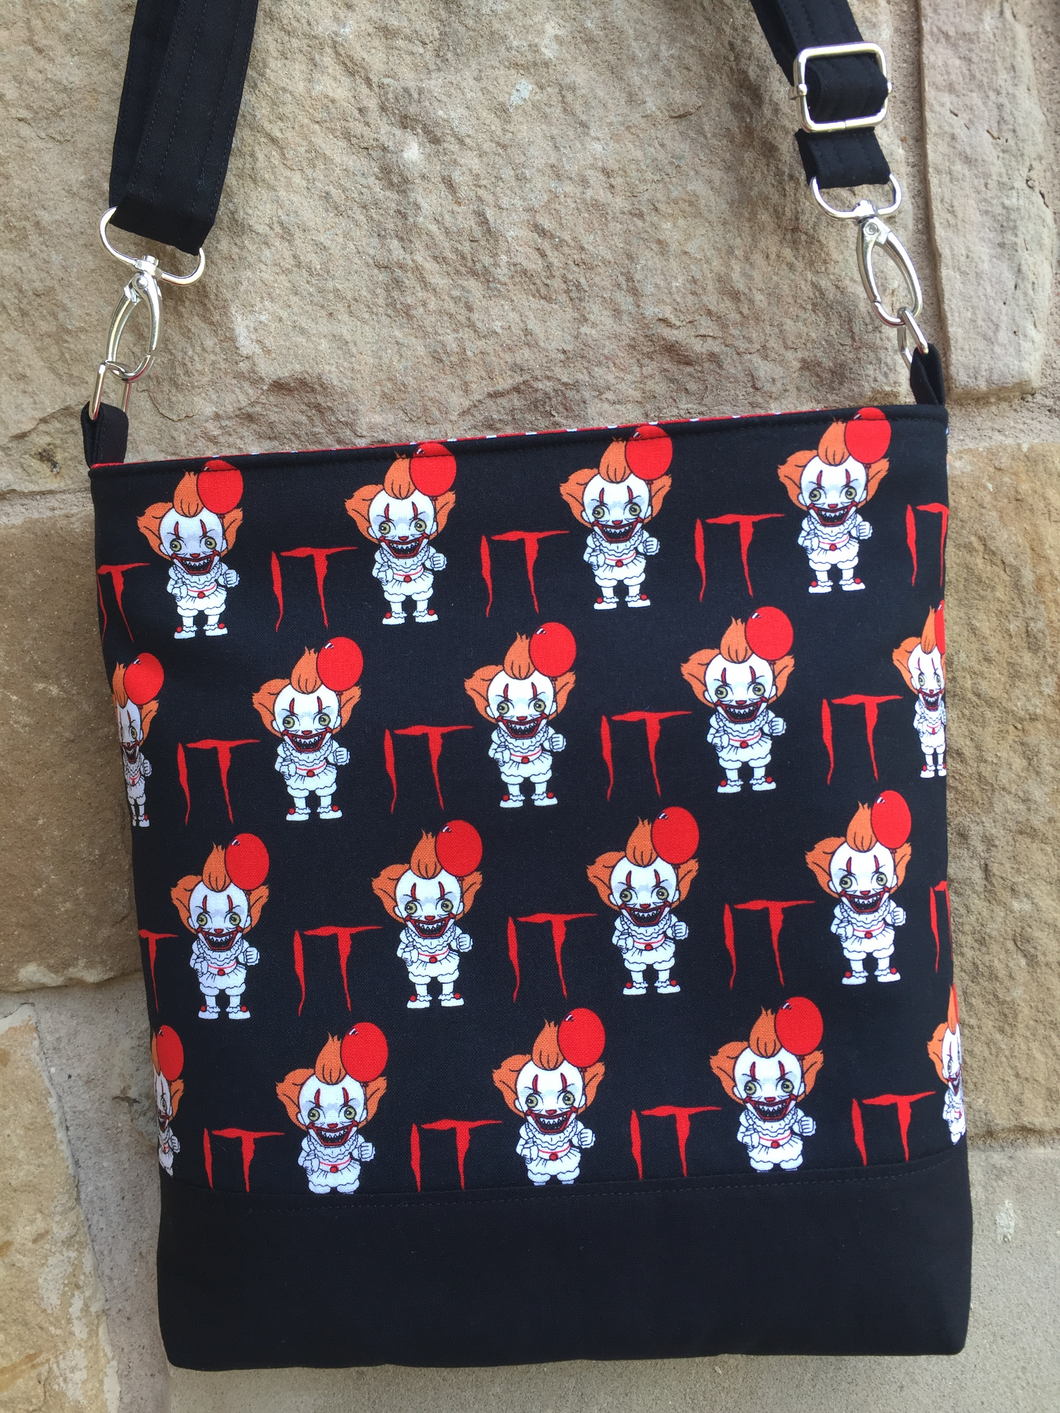 Messenger Bag Made With Licensed Chibi Horror Clown Fabric  - Adjustable Strap - Zippered Closure - Zippered Pocket - Cross Body Bag